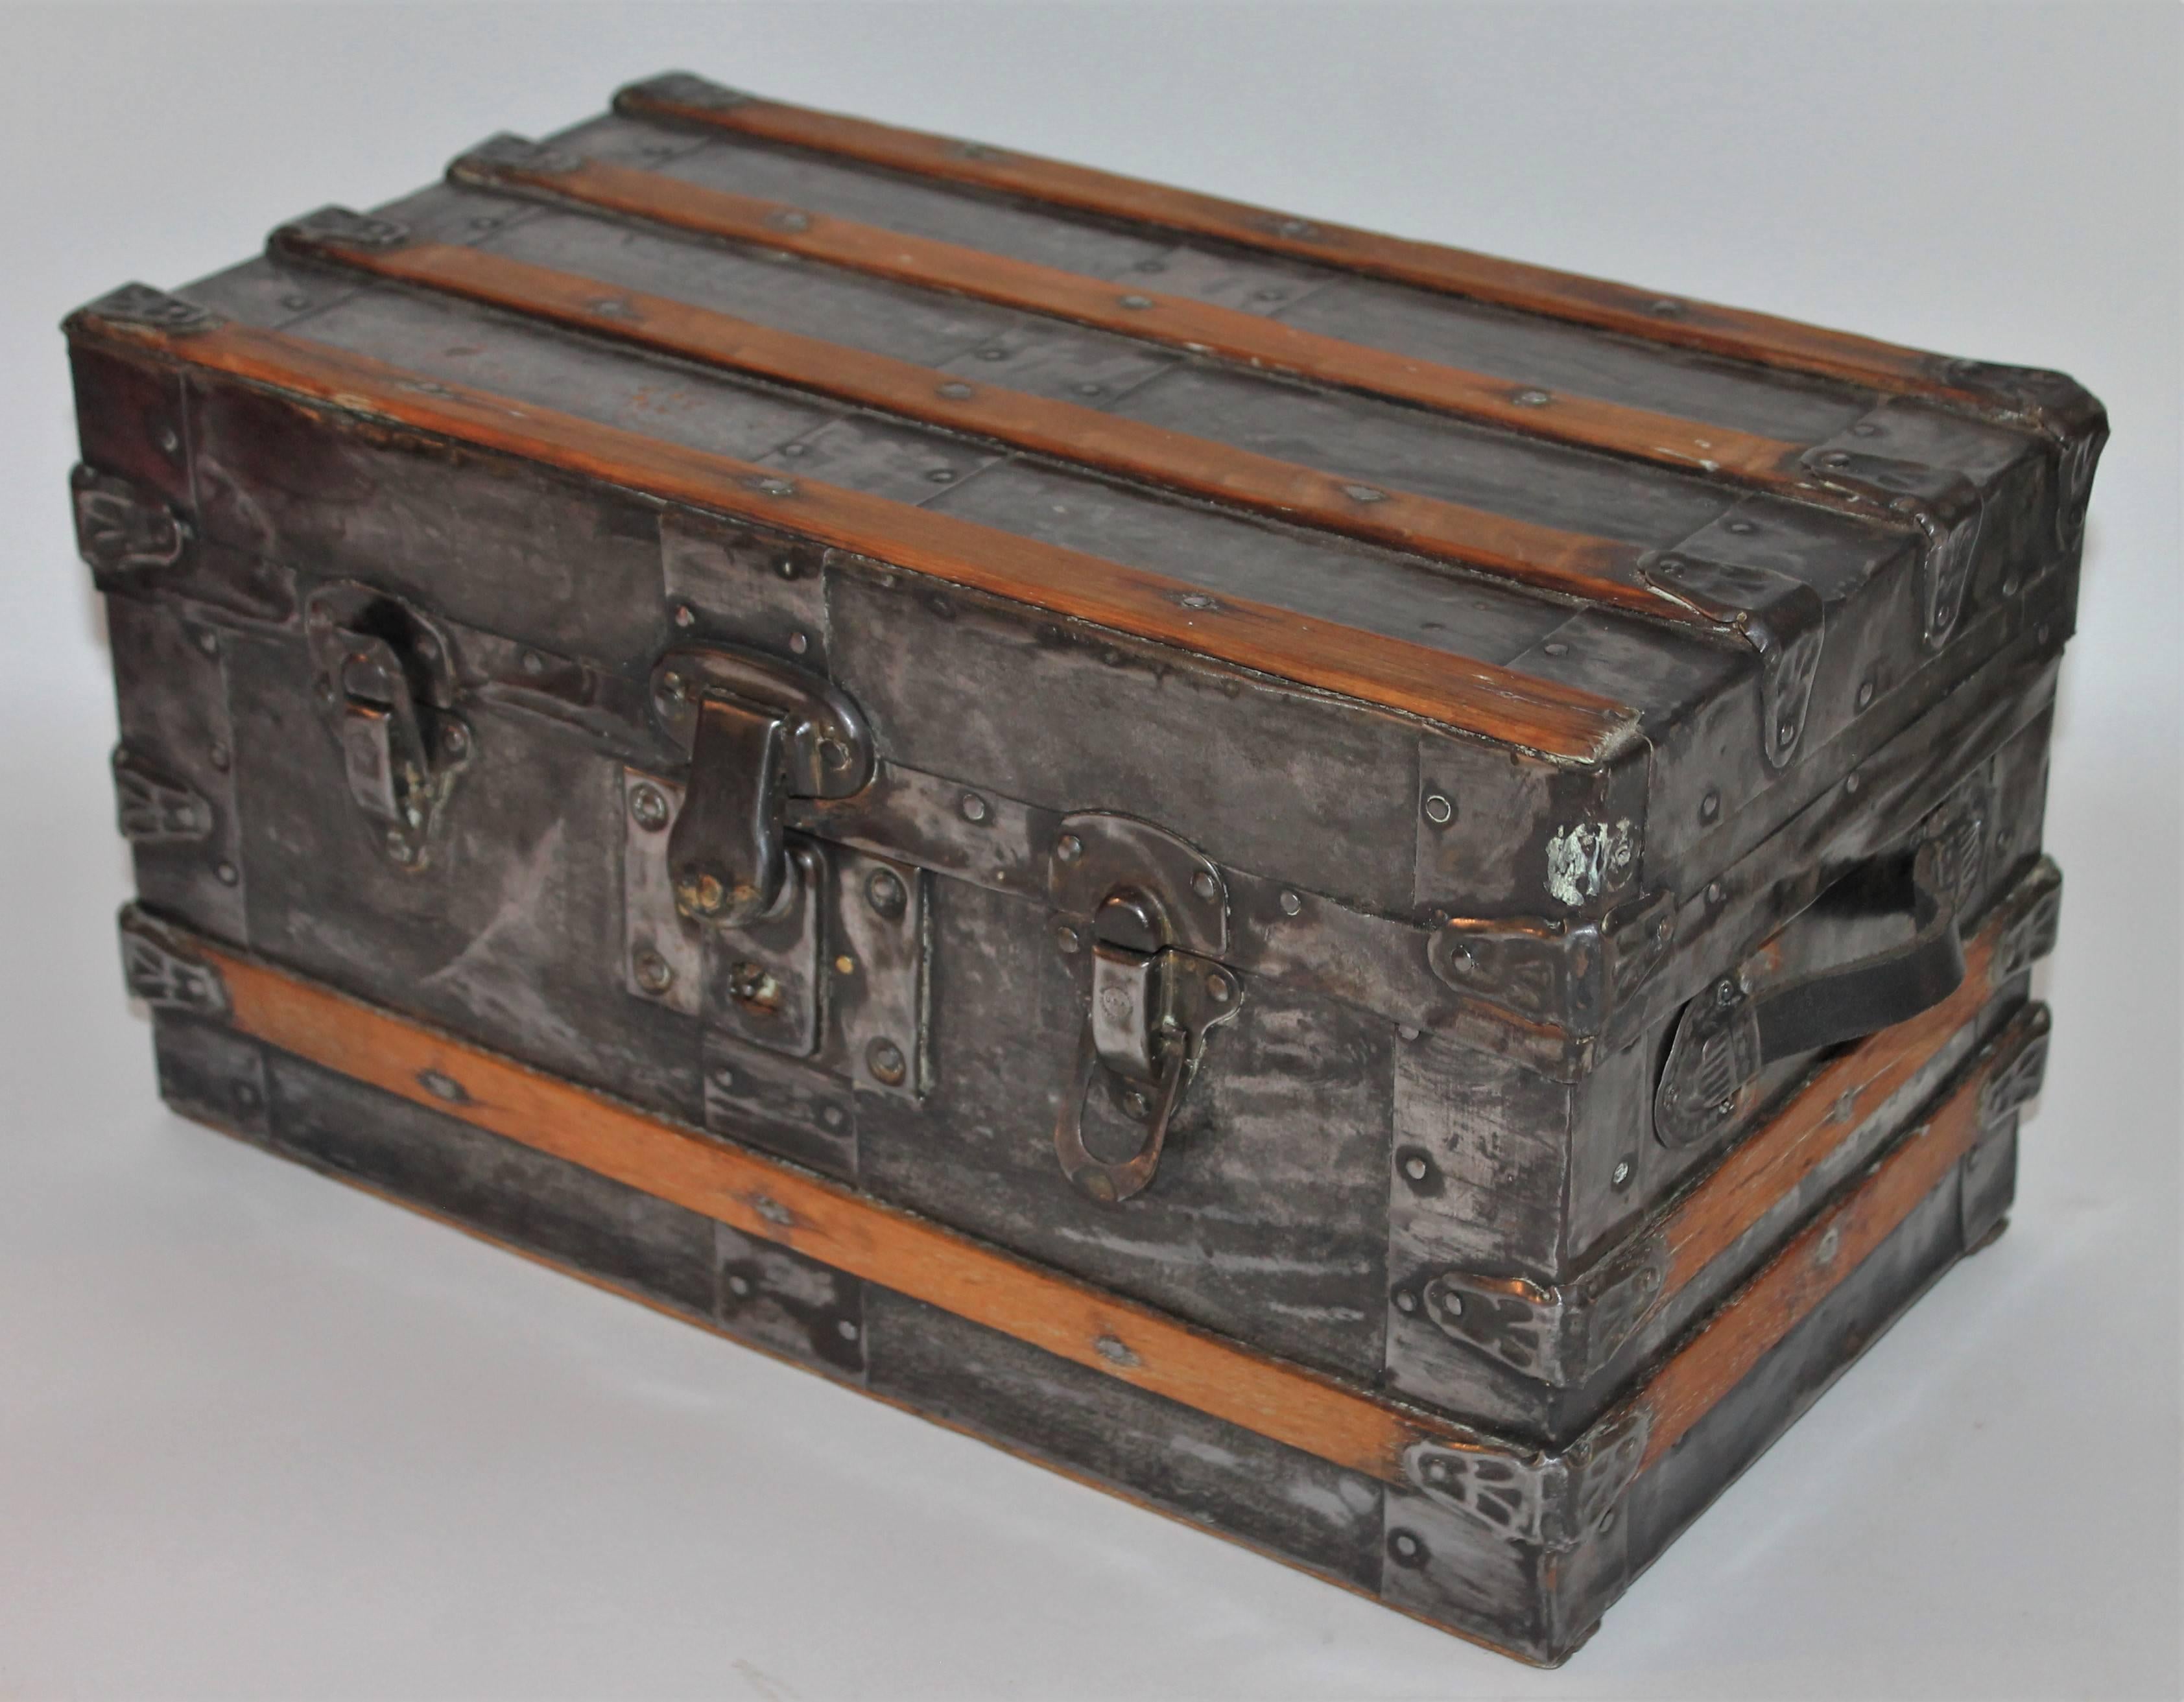 This 19th century small trunk would be great for a doll or teddy bear collection. It has a Industrial look with natural tin over wood and wood slated sides and top. It is signed Eagle Lock Co. USA / Terryville,Conn. on the metal closures. The